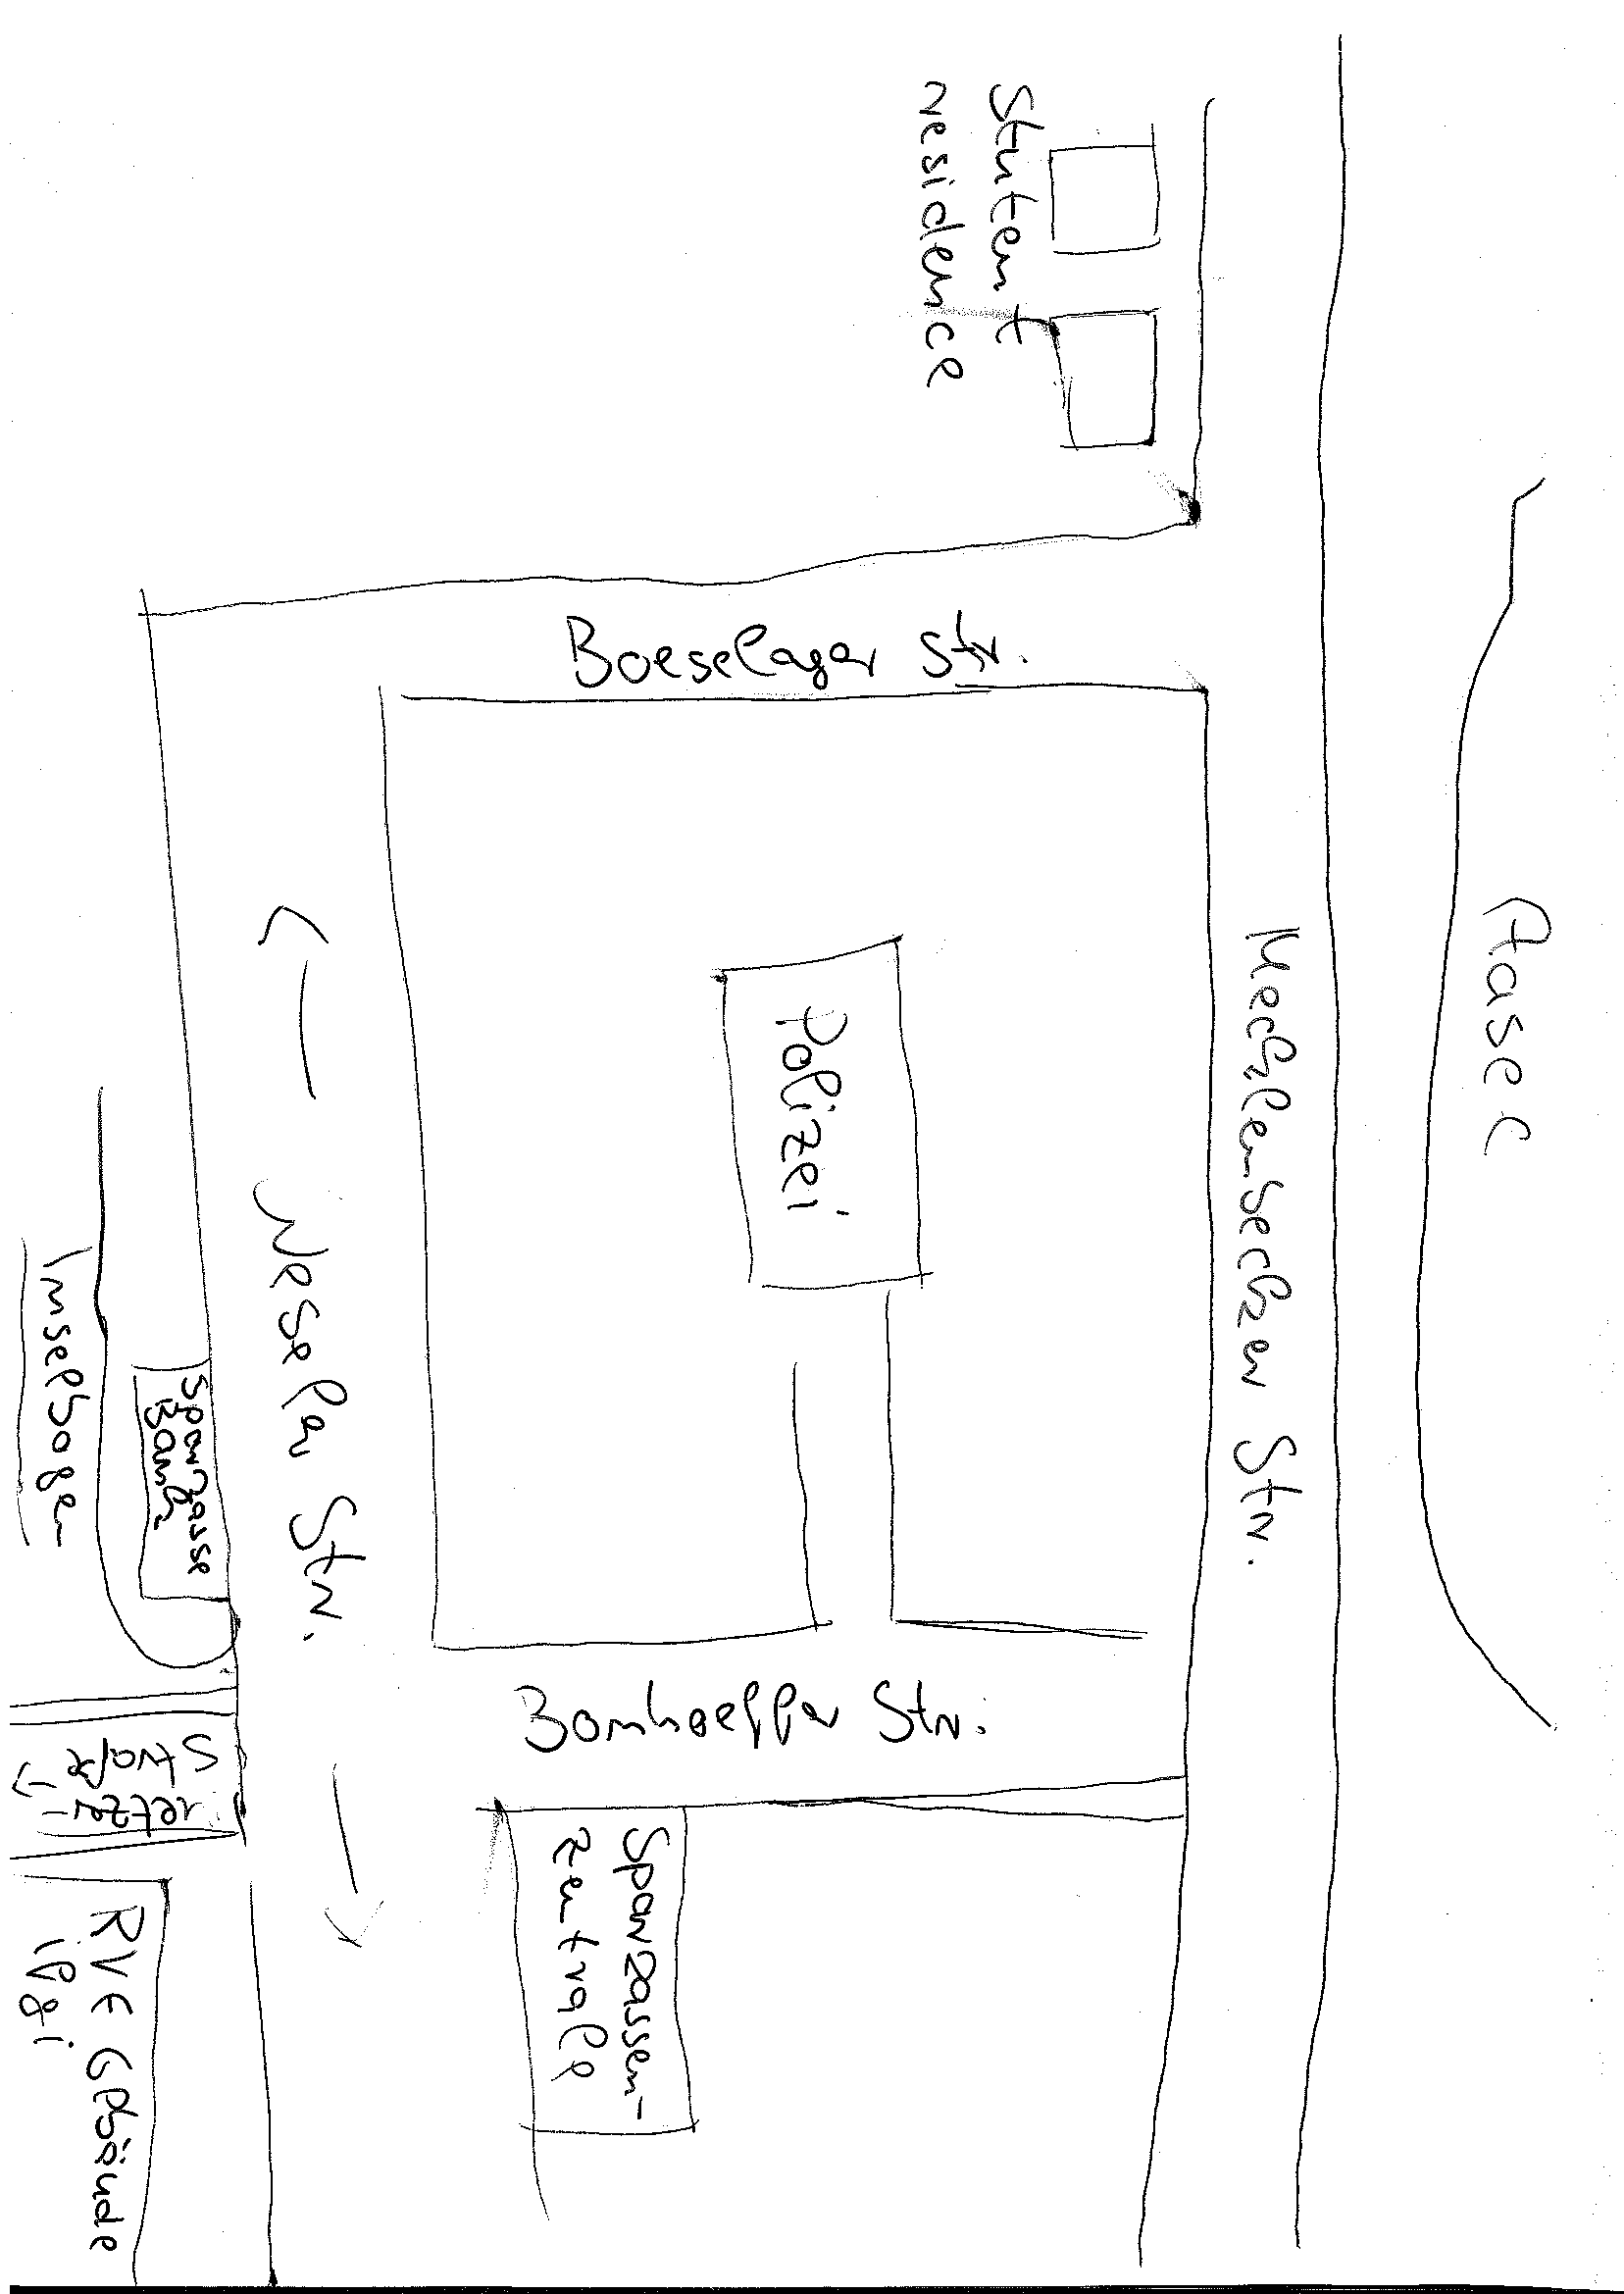 Sketch of Residence  Scribble Maps